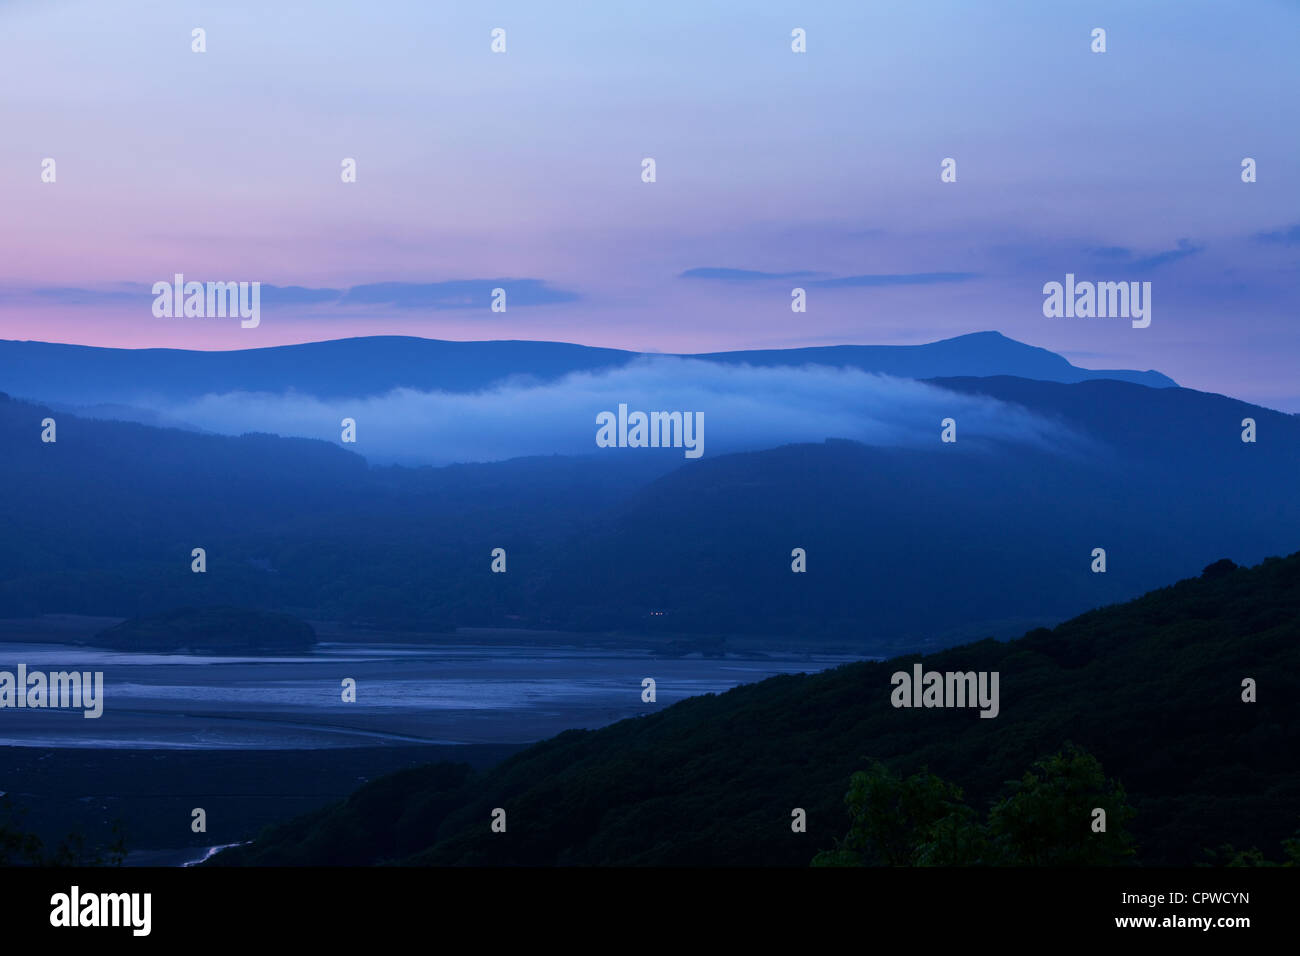 Misty morning over the  Mawddach Estuary, Snowdonia National Park, North Wales UK Stock Photo